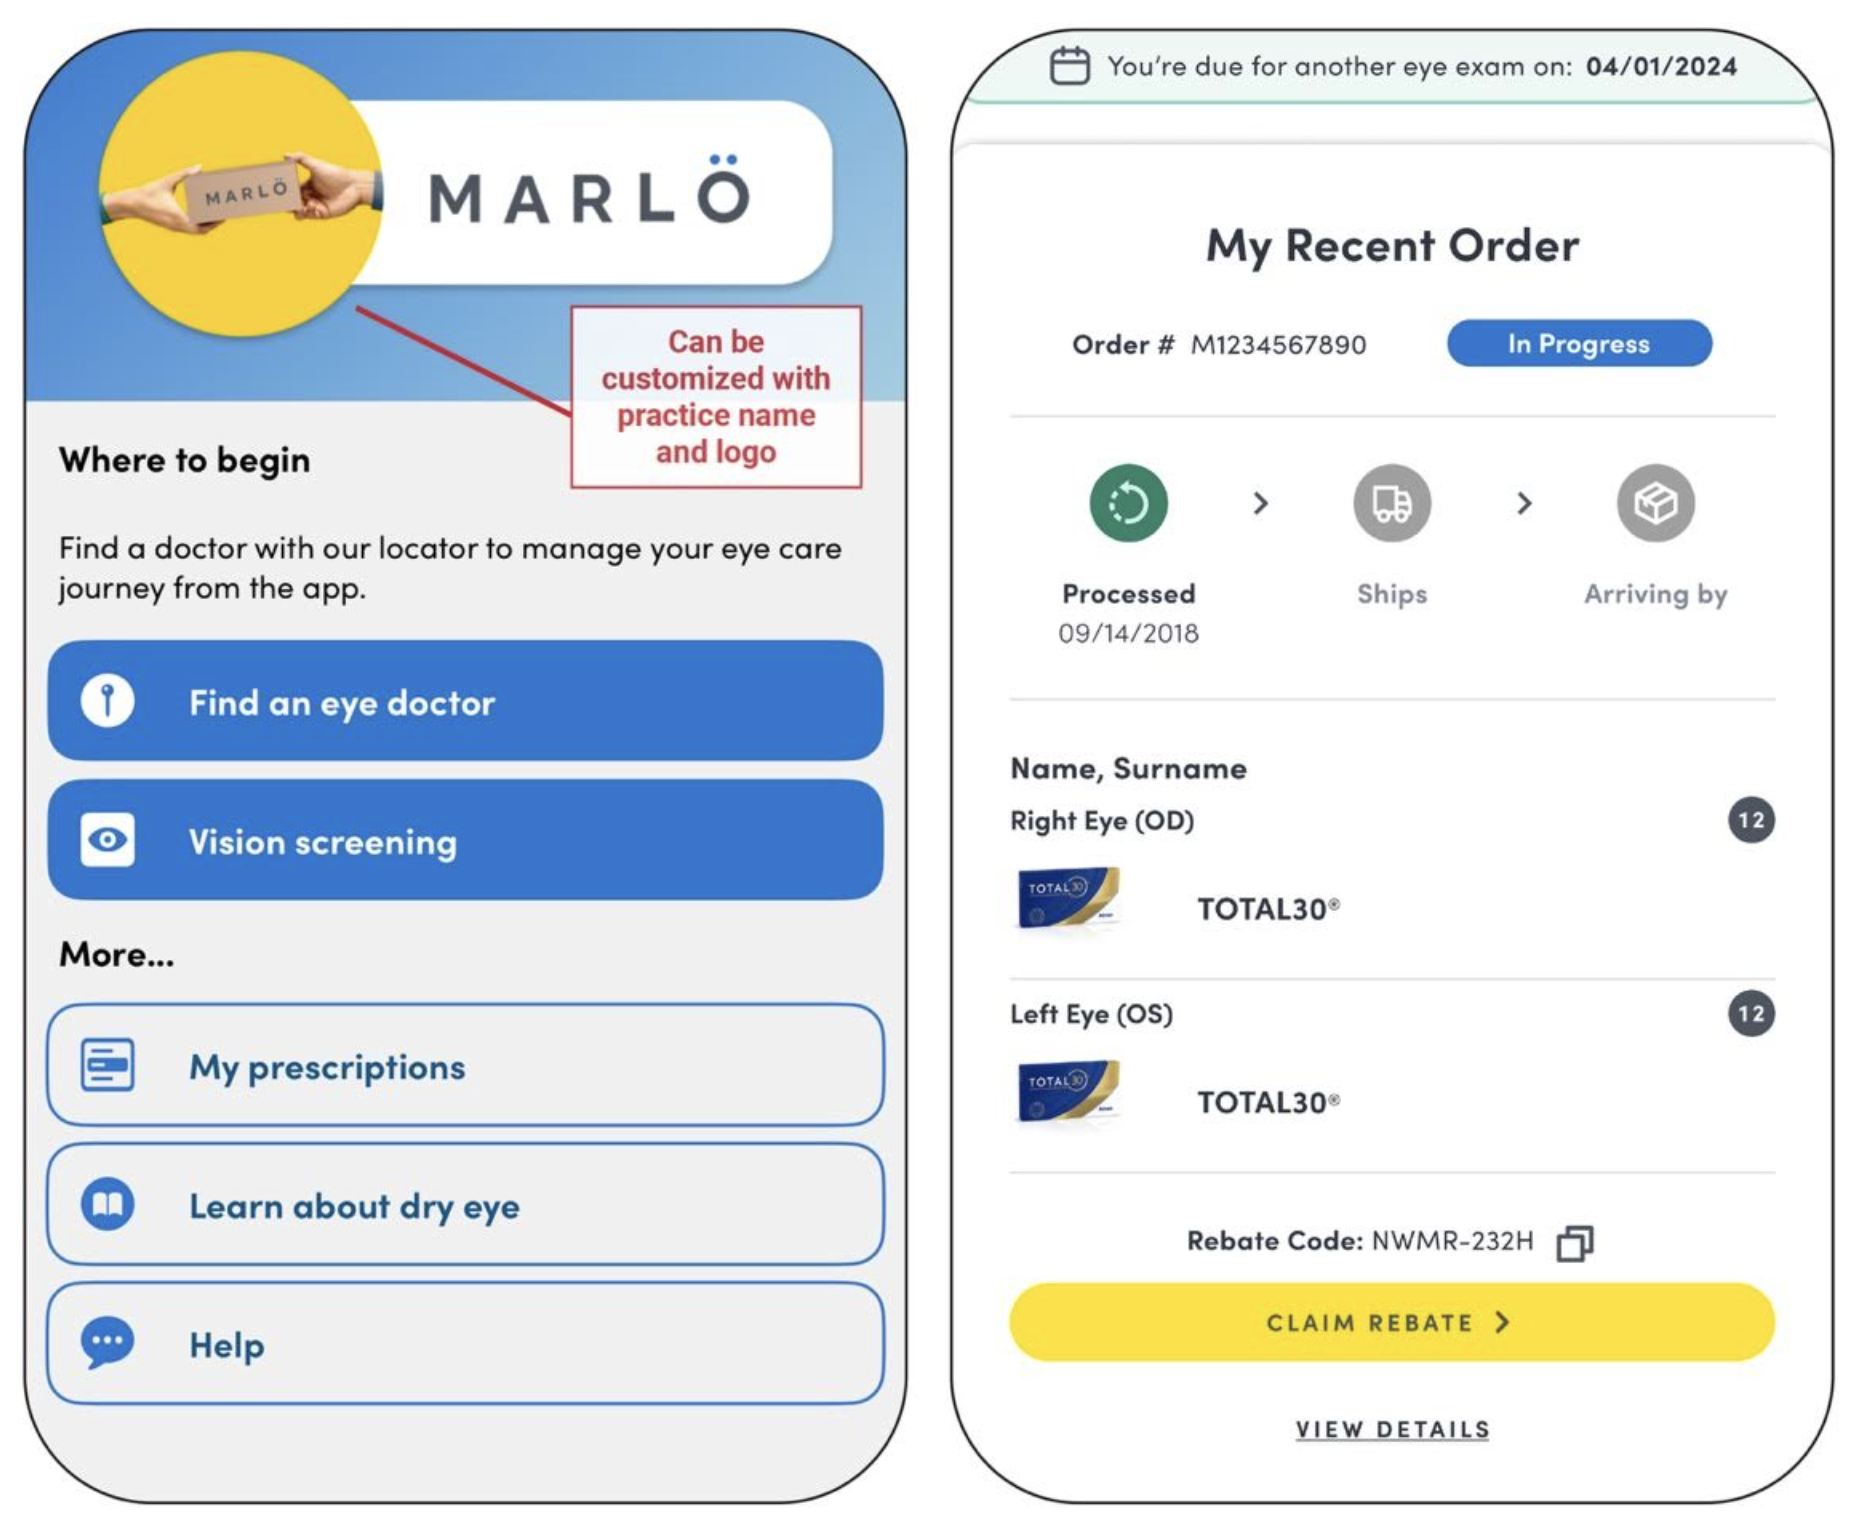 A snapshot of the Marlo app, which allows patients to order contact lenses virtually from their ECP.